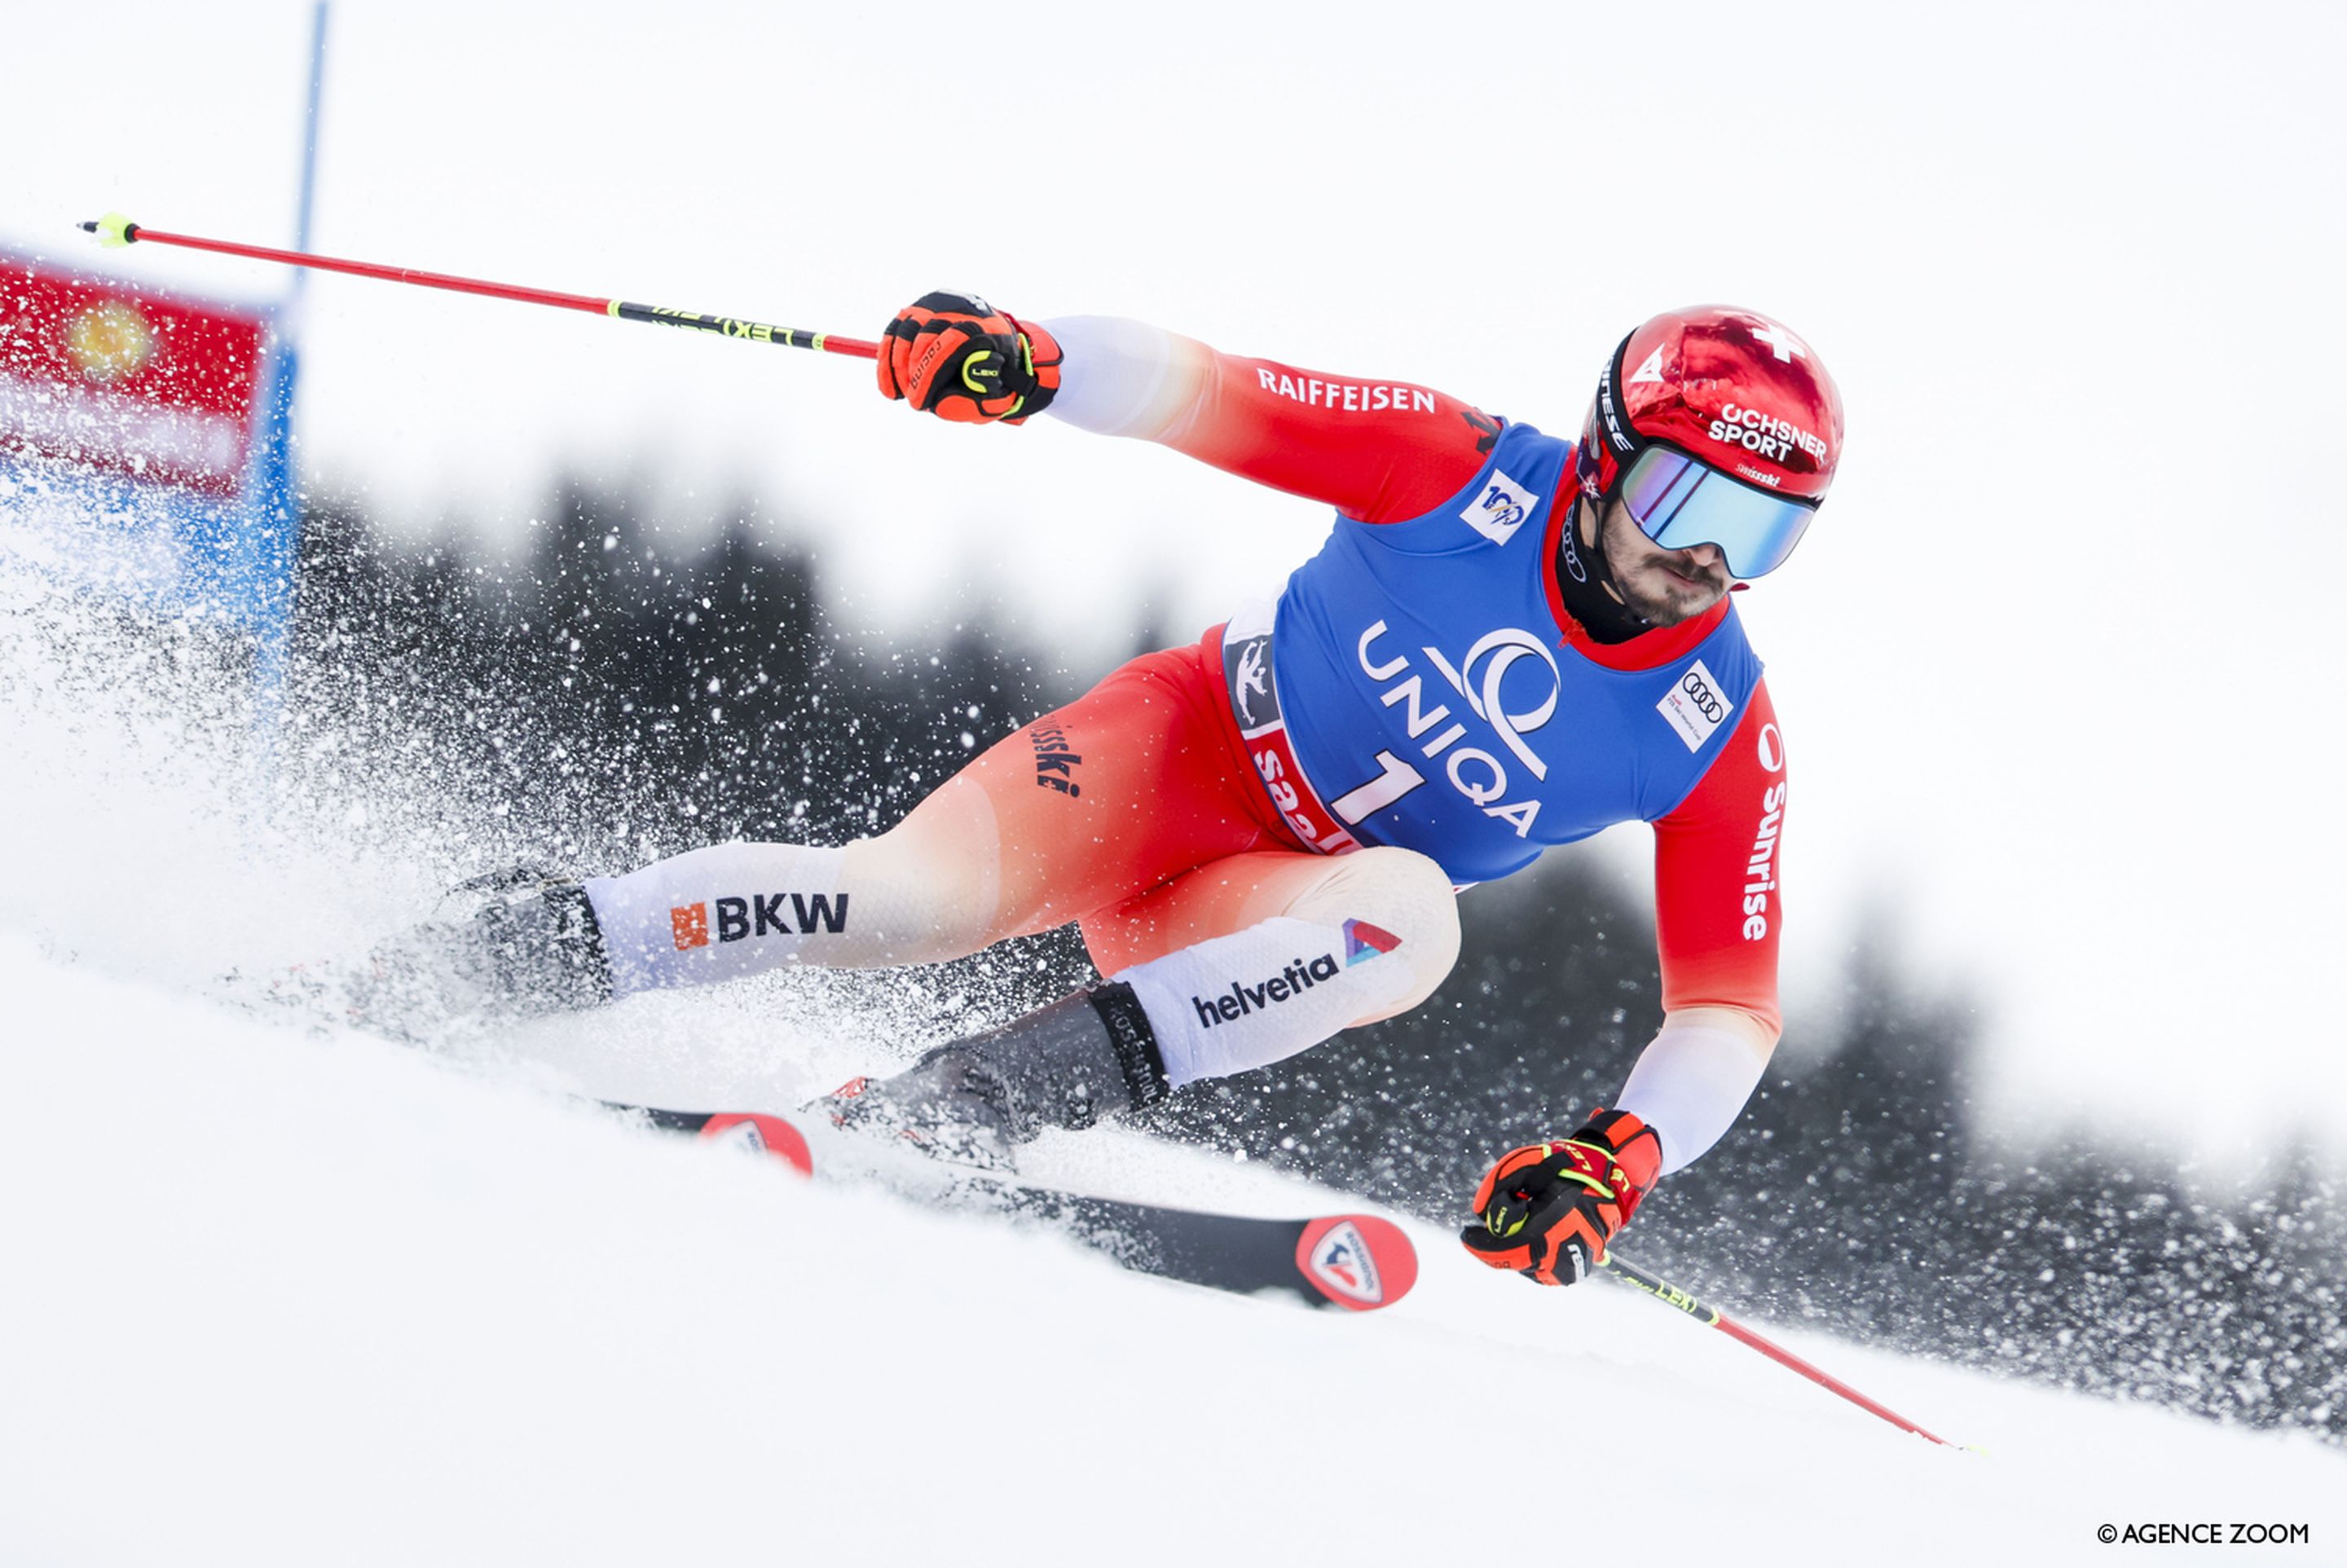 Loic Meillard (SUI) on his way to the second giant slalom World Cup win of his career